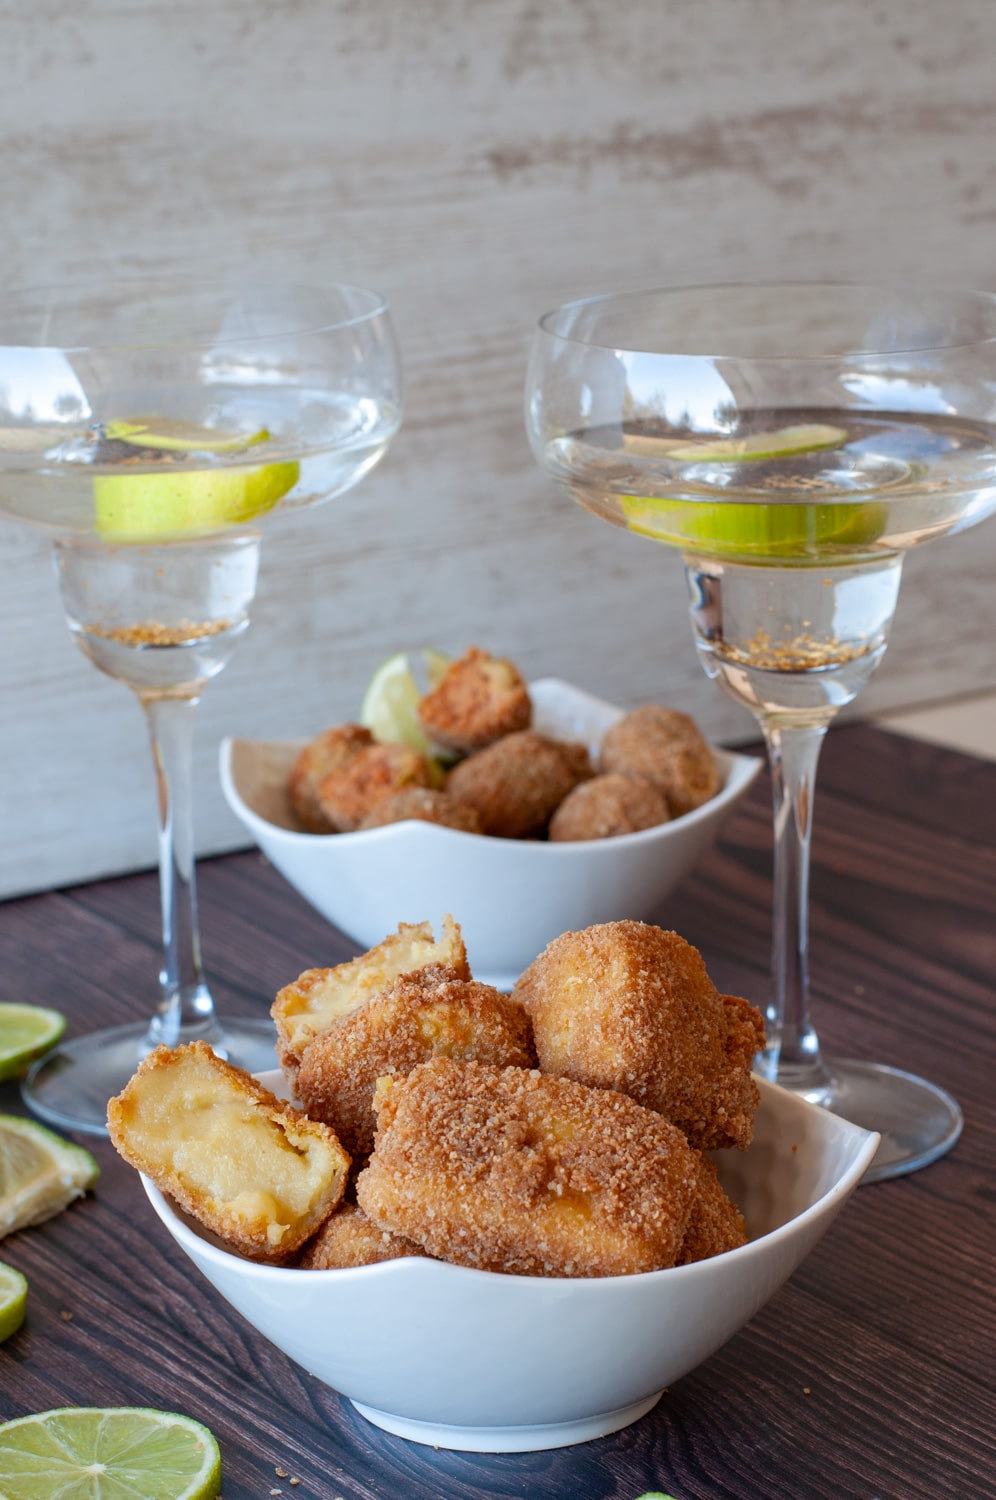 fried custard served with an aperitif